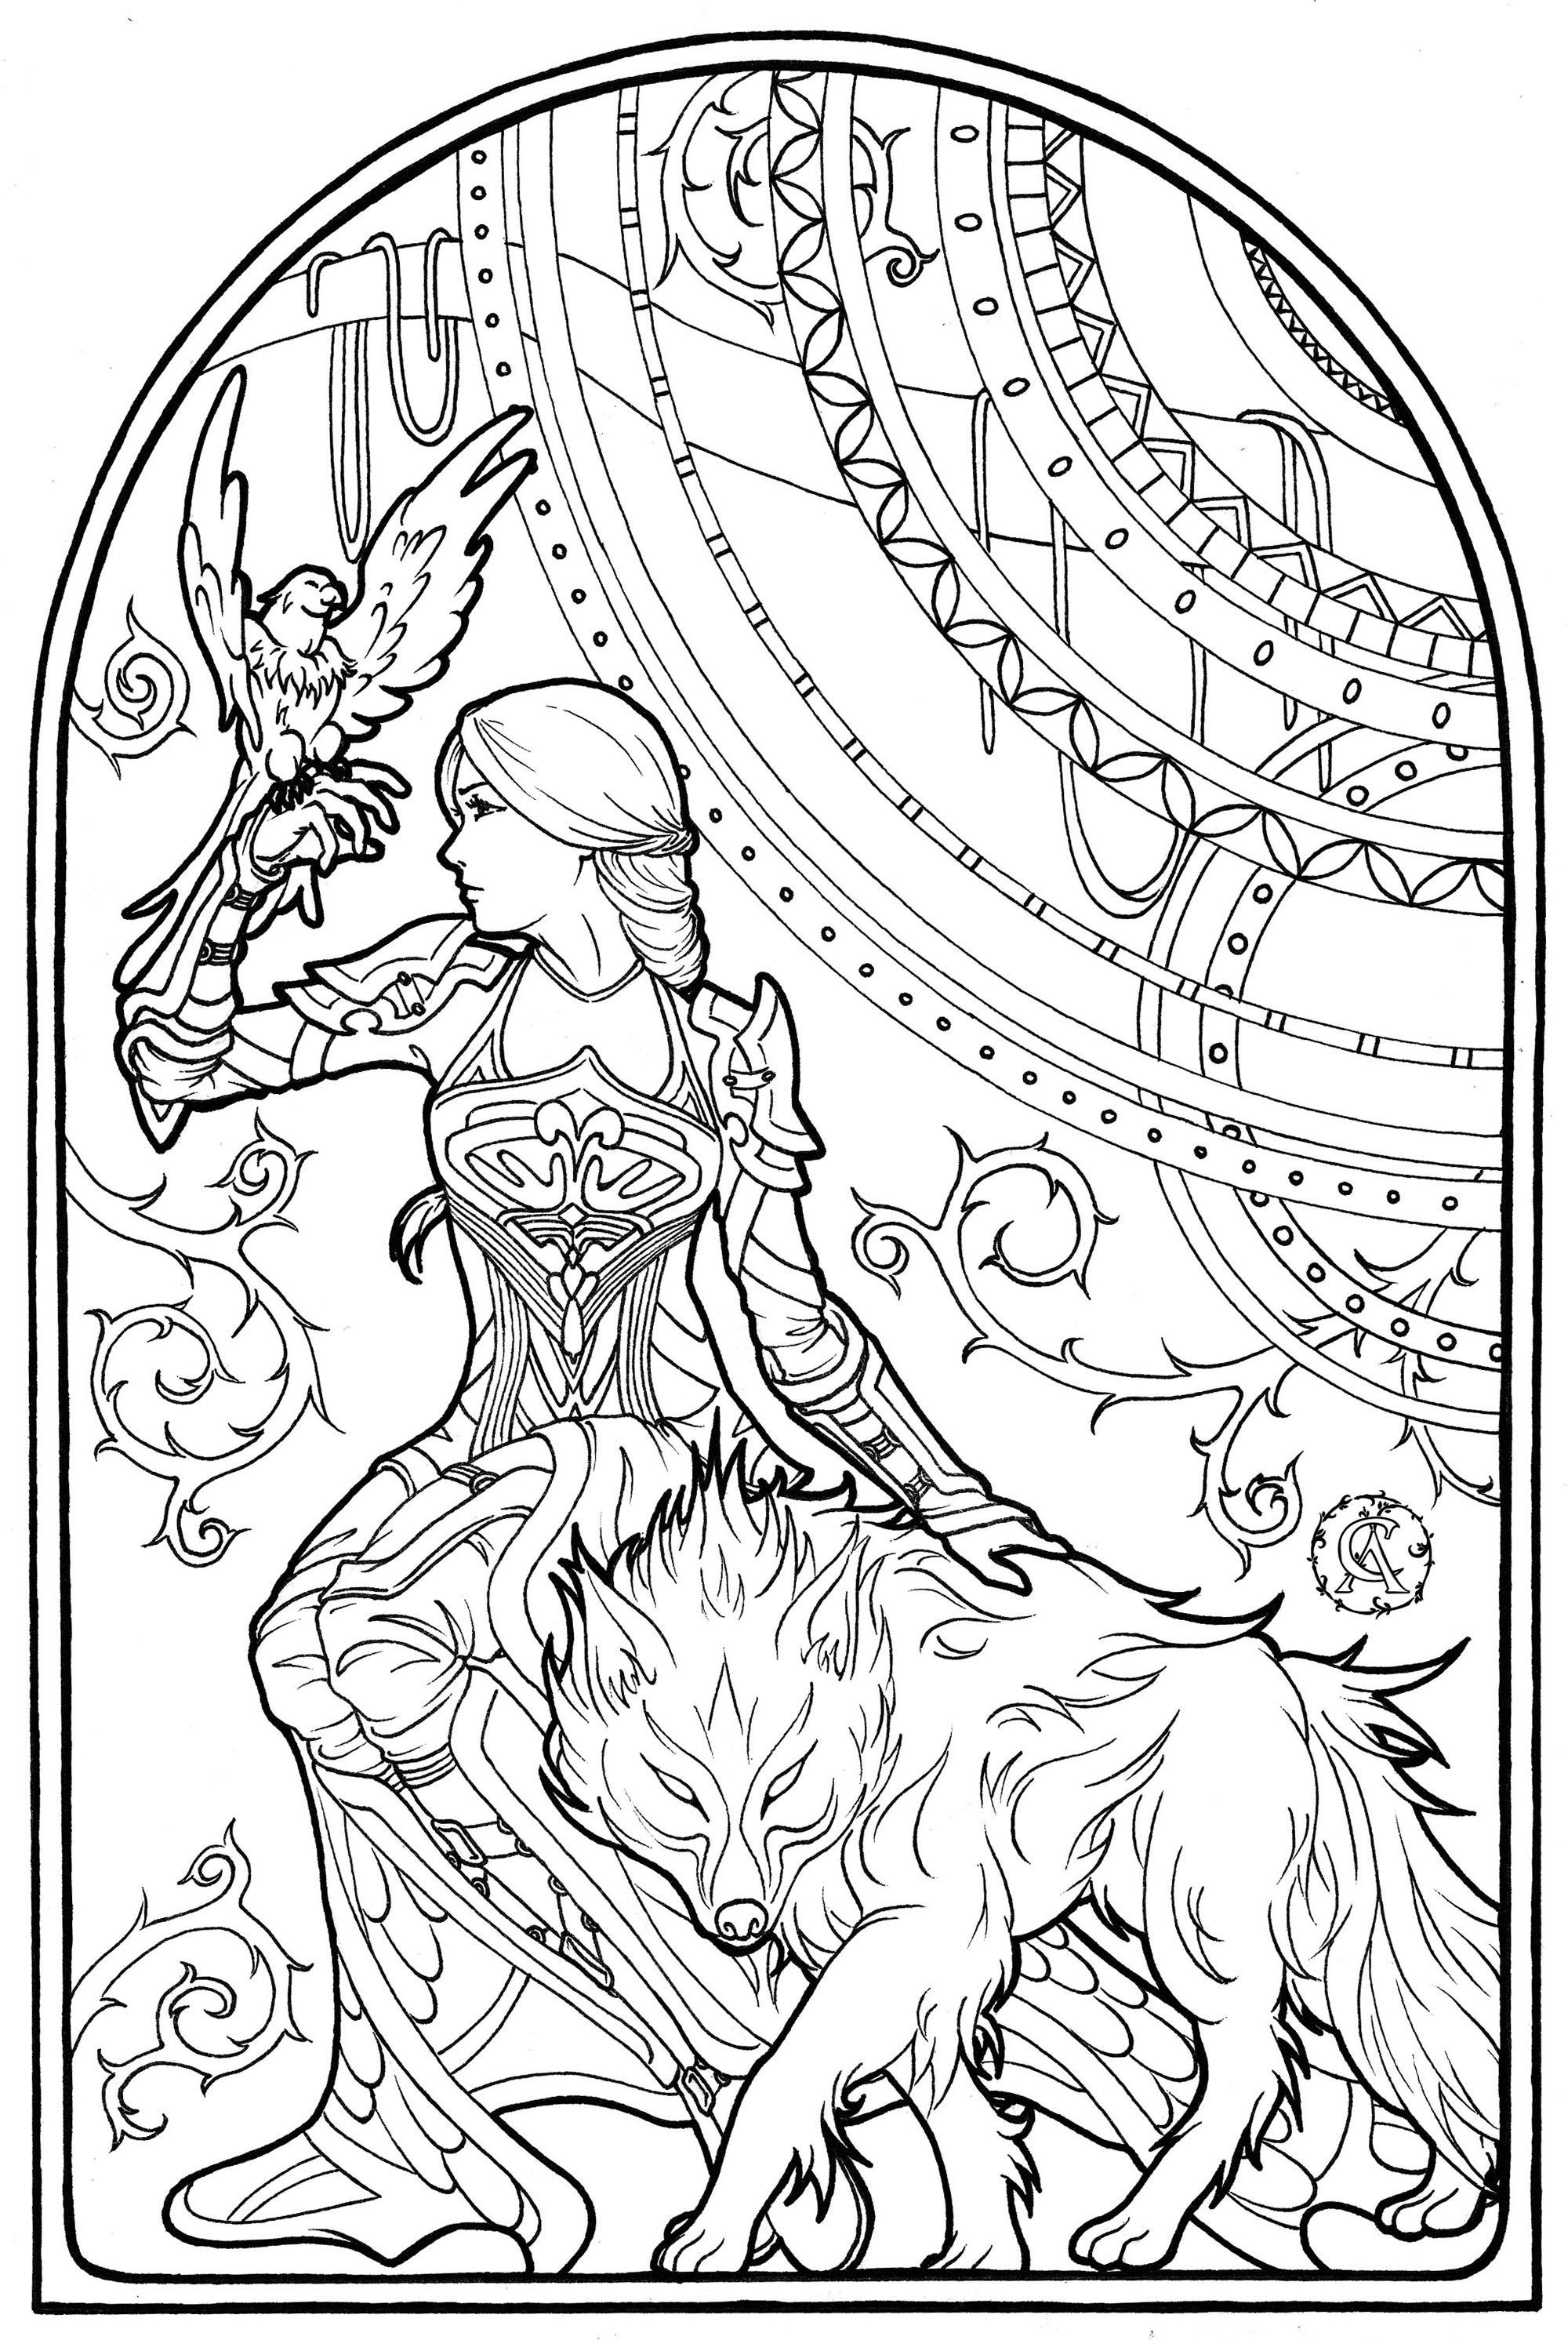 Druidess and her companions - Myths & legends Adult Coloring Pages